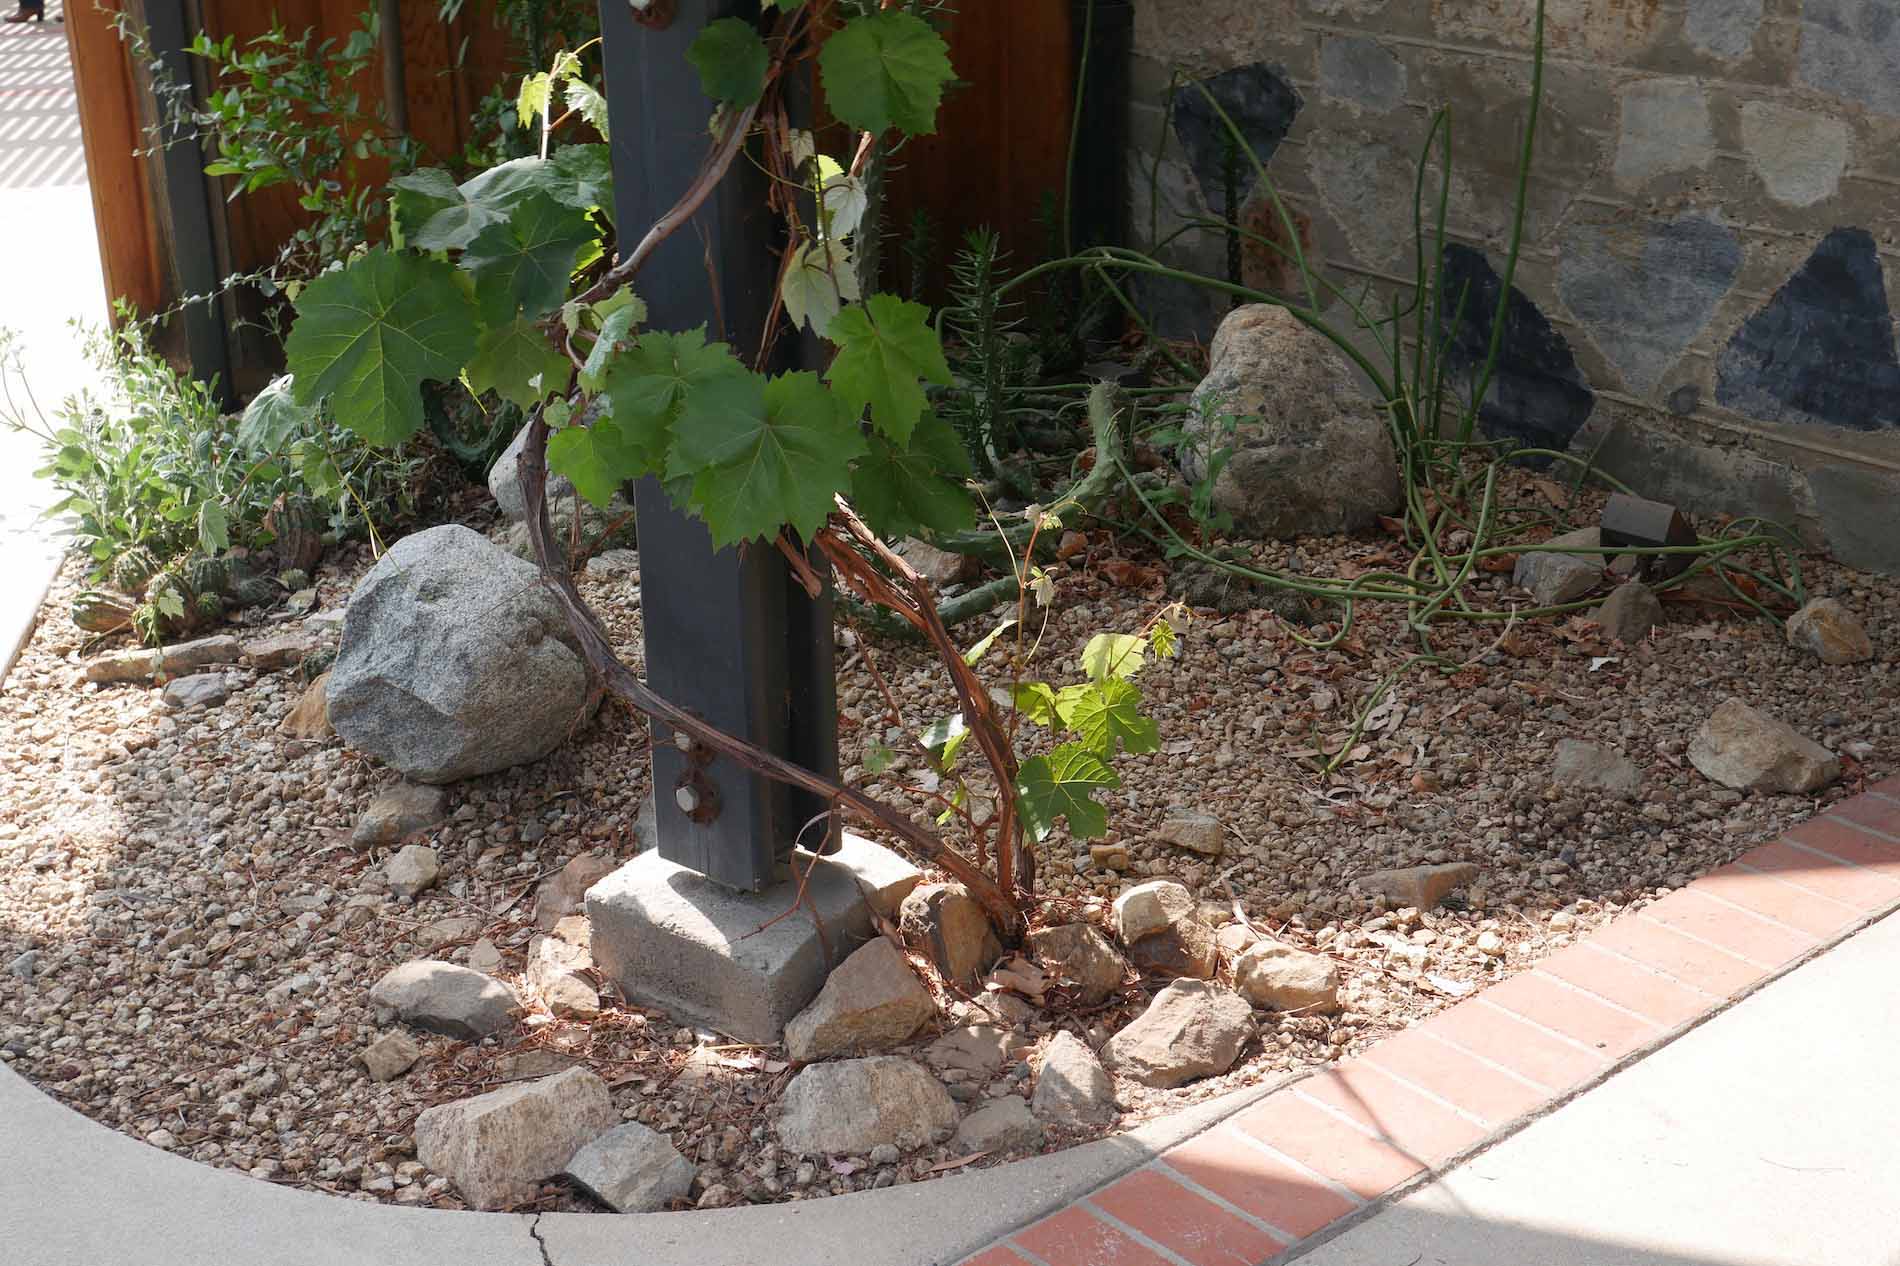 Gravel mulch with cobble and boulders at Maloof Foundation Garden in Rancho Cucamonga.